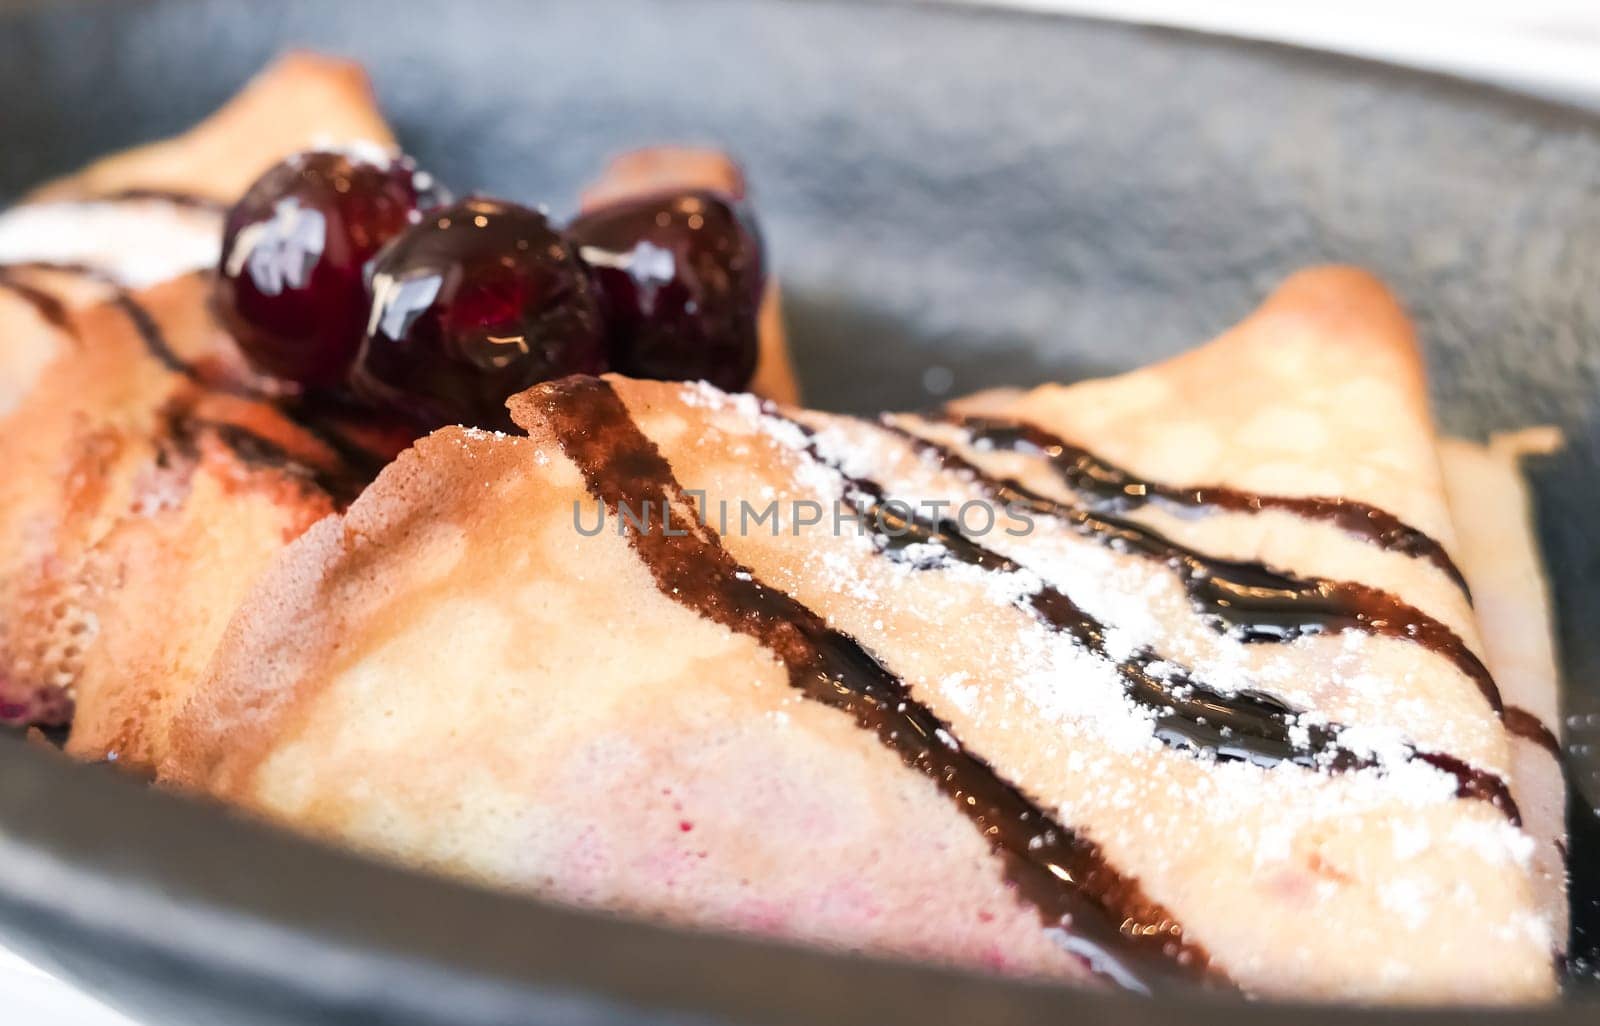 Sweet dessert, breakfast food and luxury service - French crepes with chocolate sauce and cherries in a reastaurant in Paris, pancakes recipe